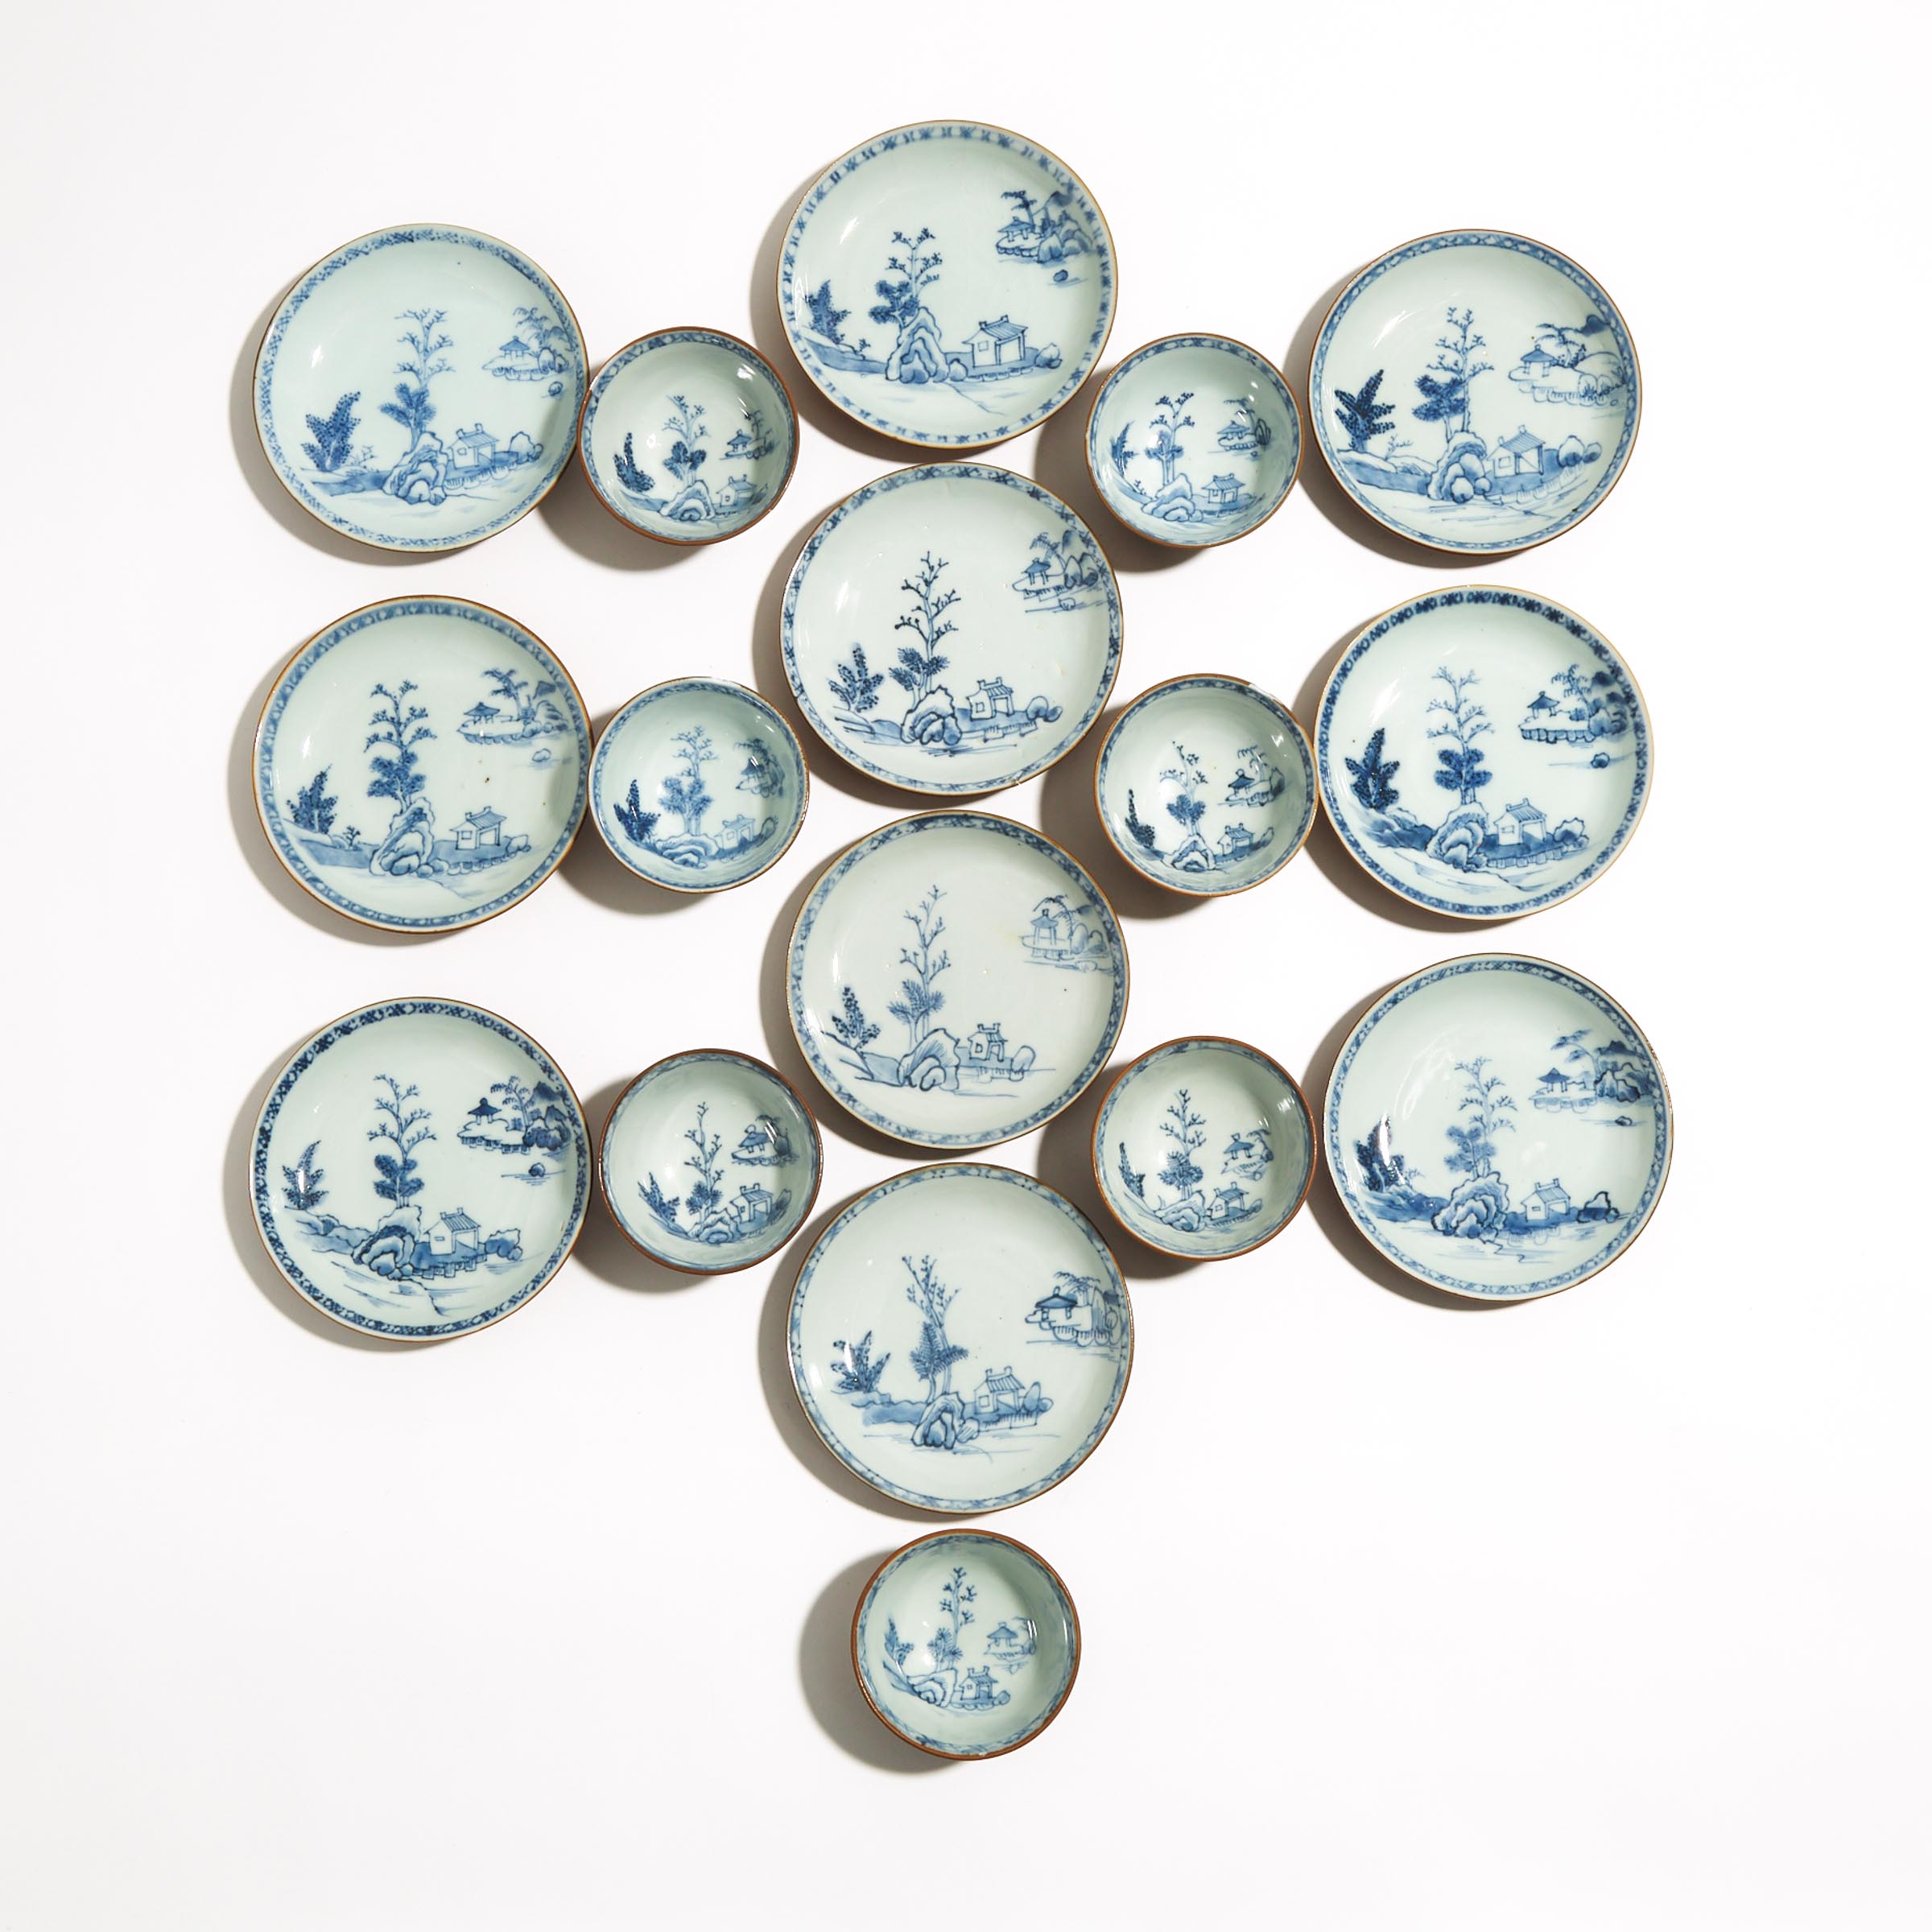 A Set of Seventeen 'Batavian Pavilion' Pattern Teabowls and Saucers from the Nanking Cargo, Qianlong Period, Circa 1750